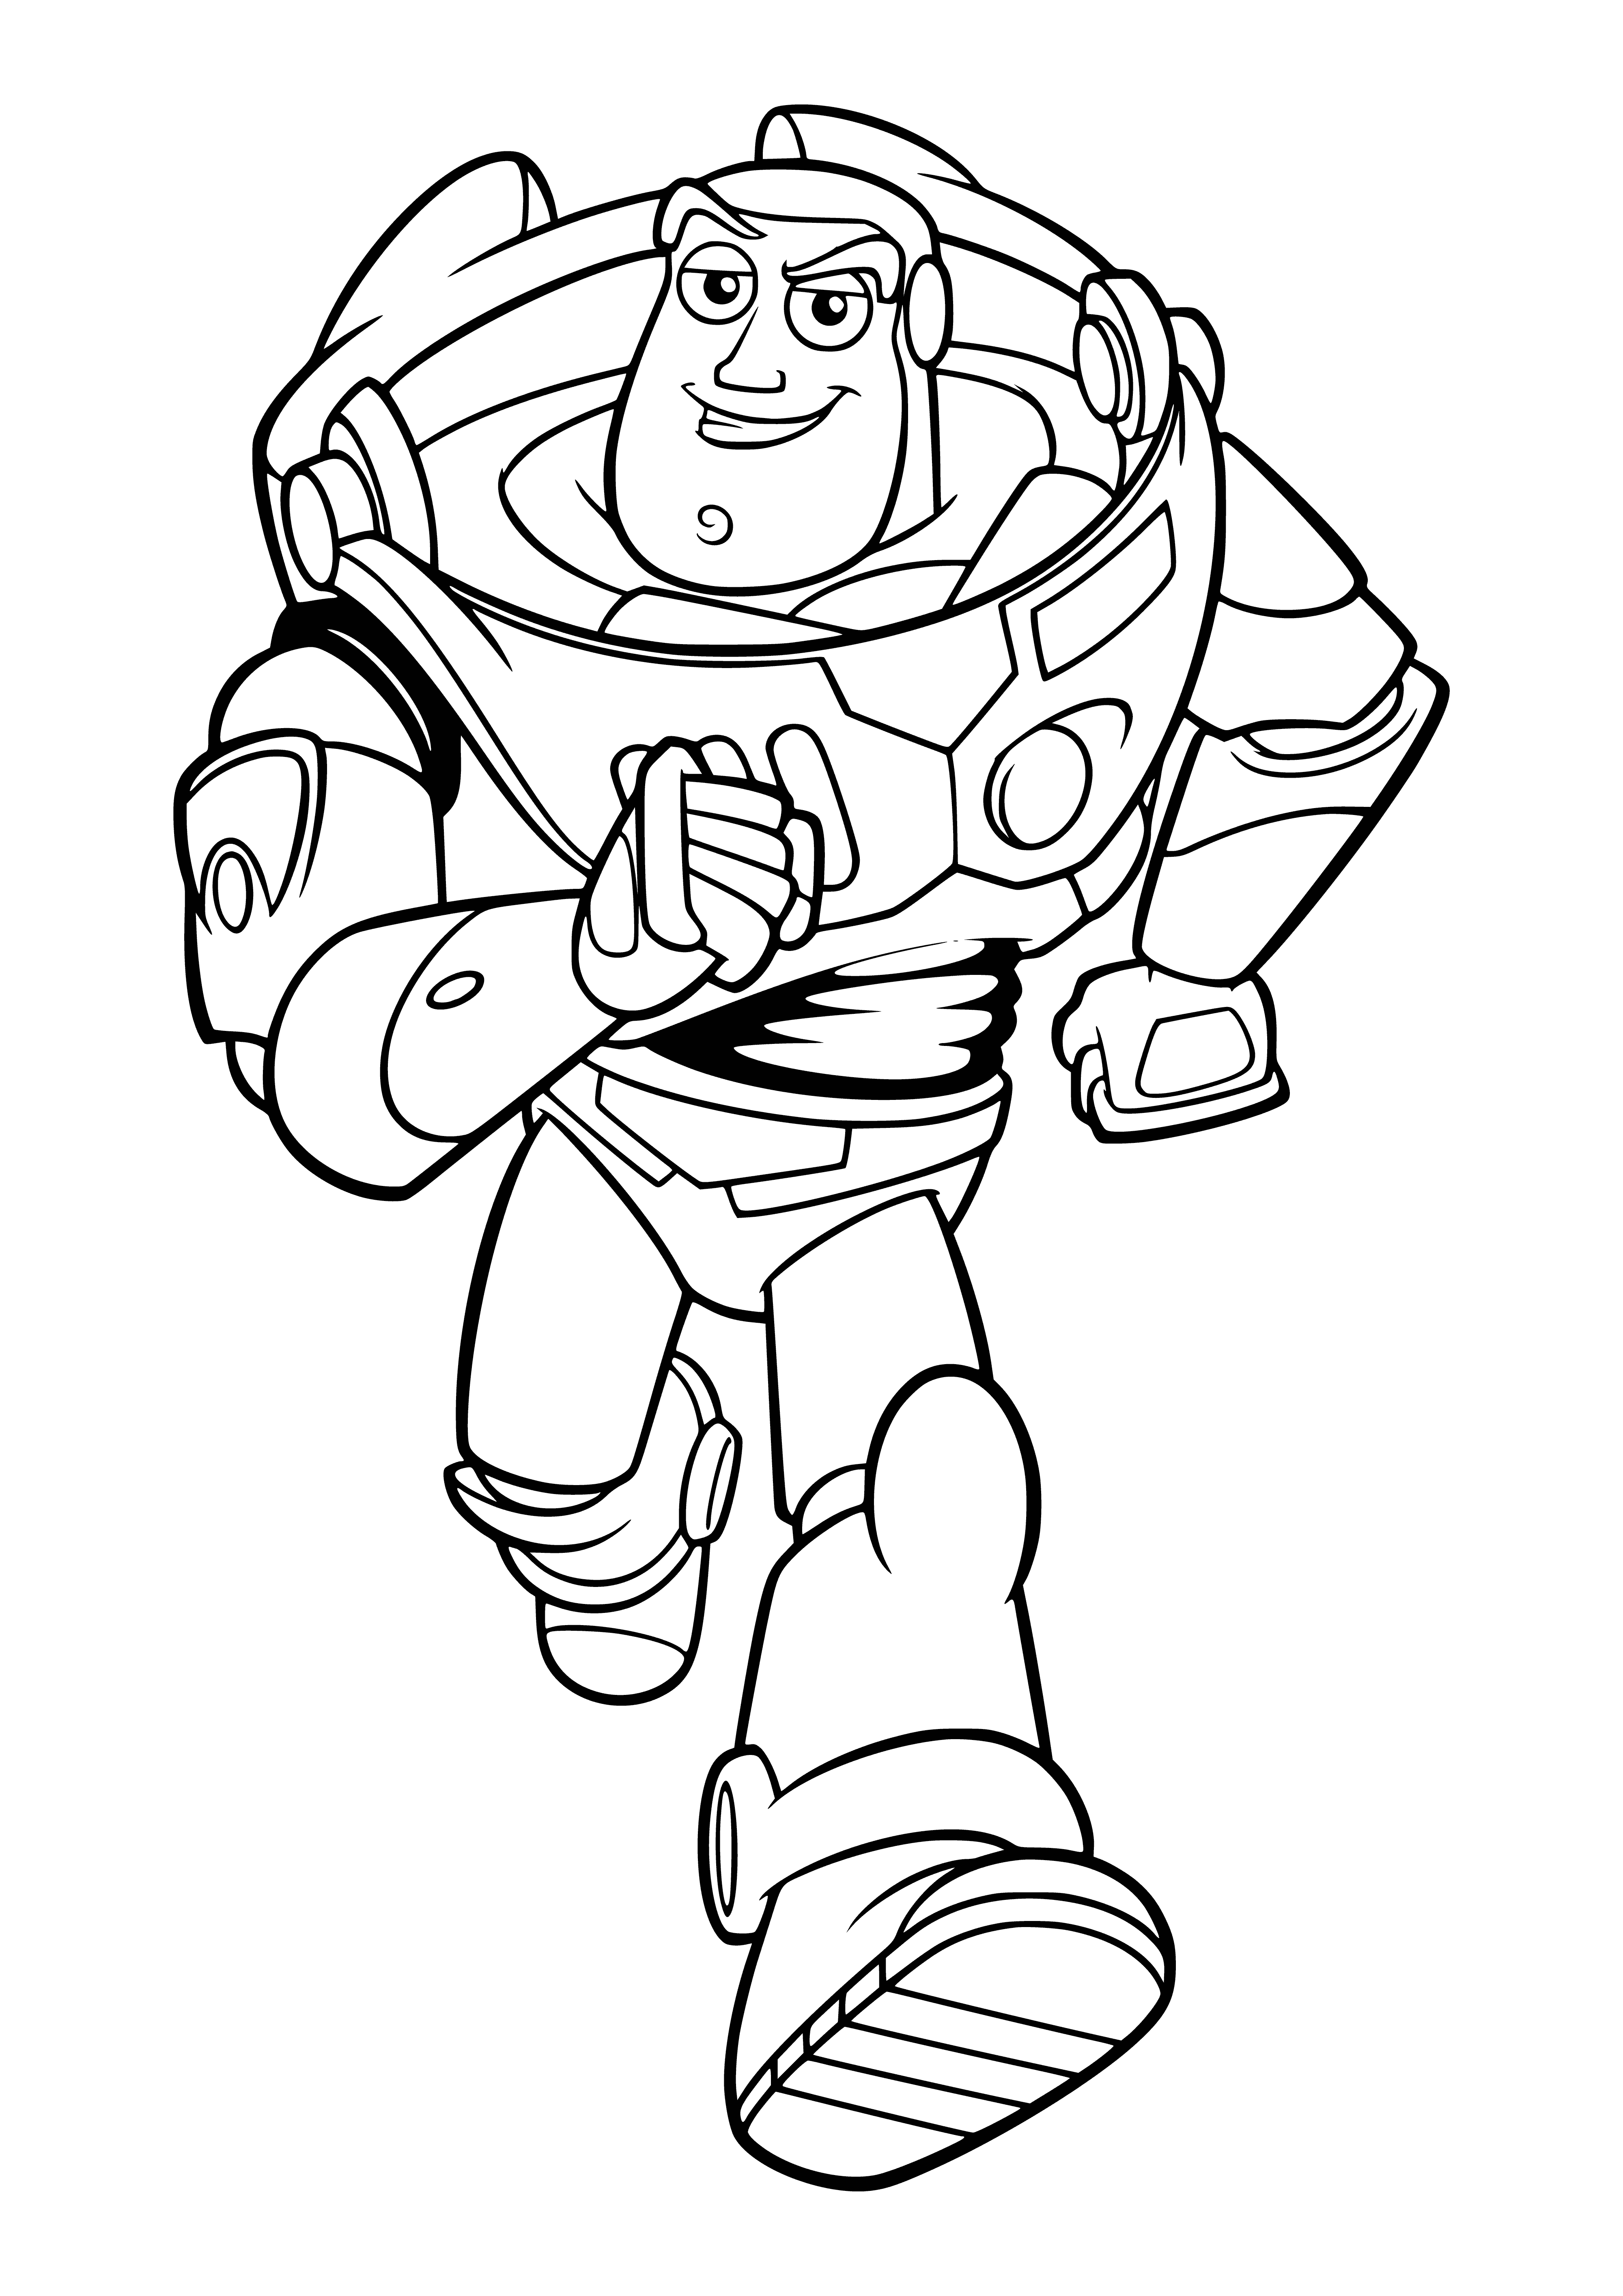 coloring page: Buzz is the leader of a space ranger team. He's ready to fight with his laser gun & jetpack to fly around.